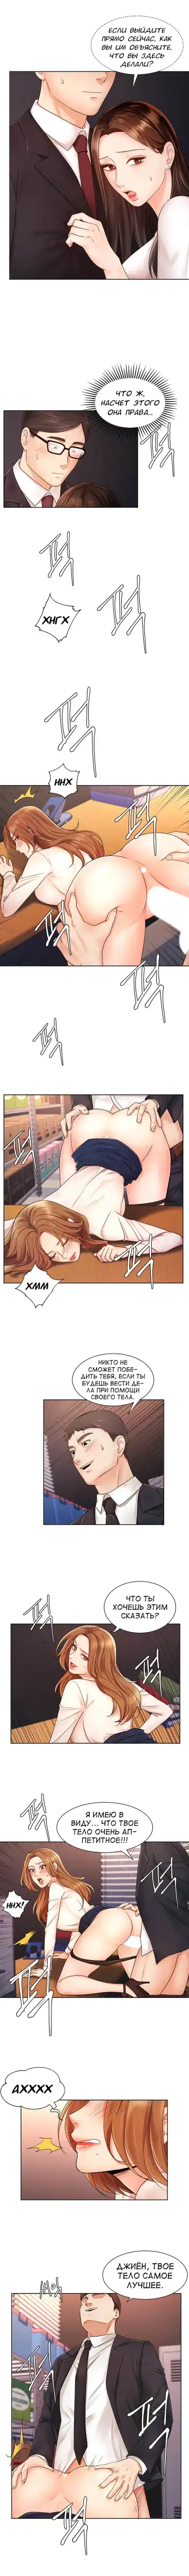 Sold Out Girl | Продажная девушка Fhentai.net - Page 73